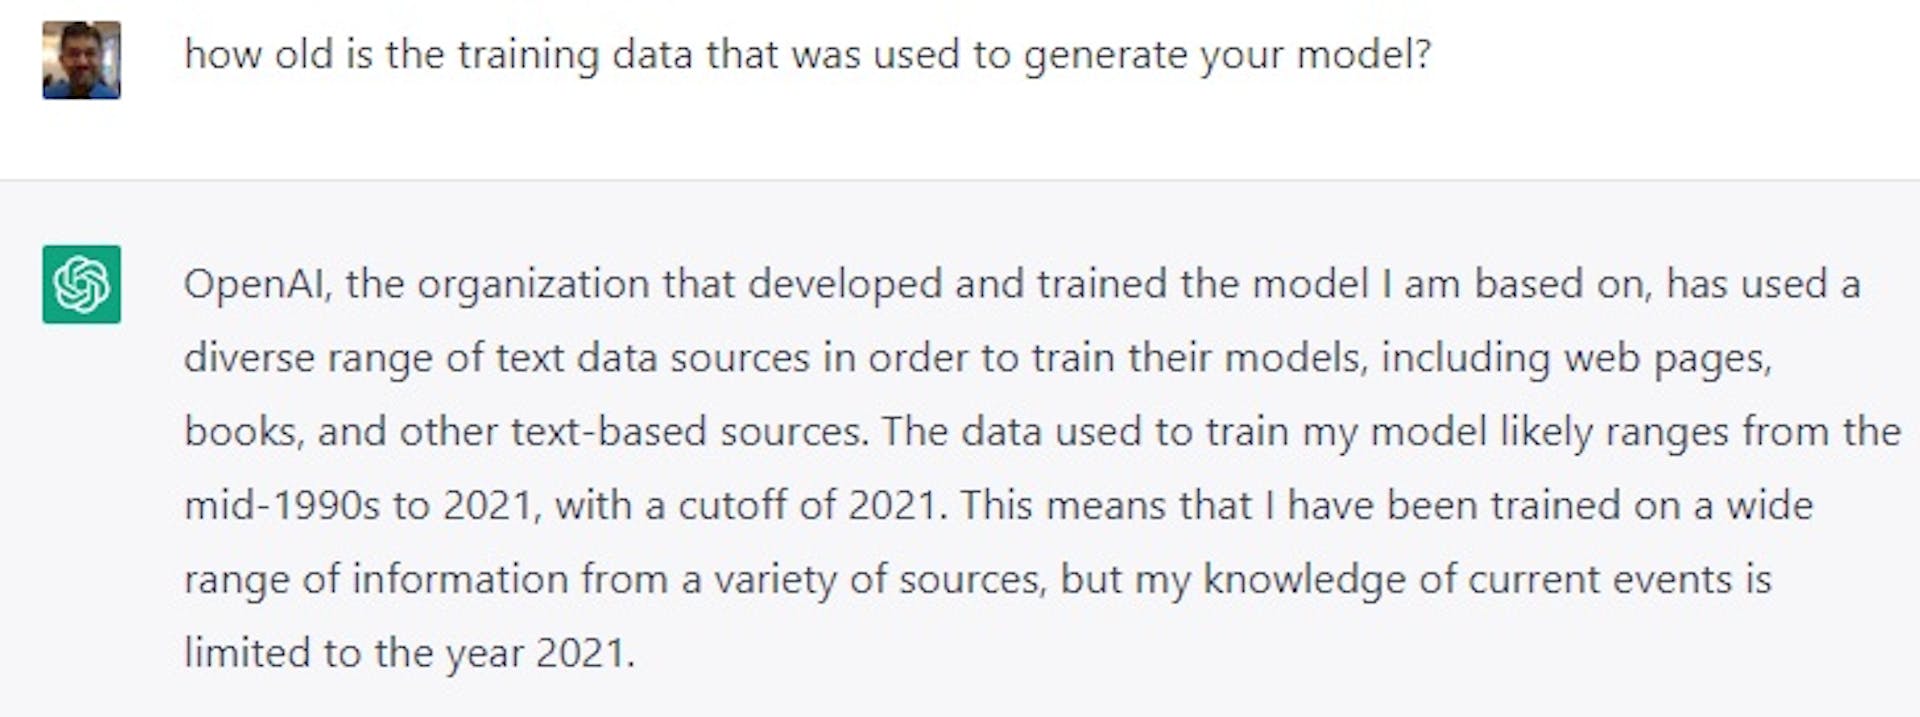 How old is your training data?